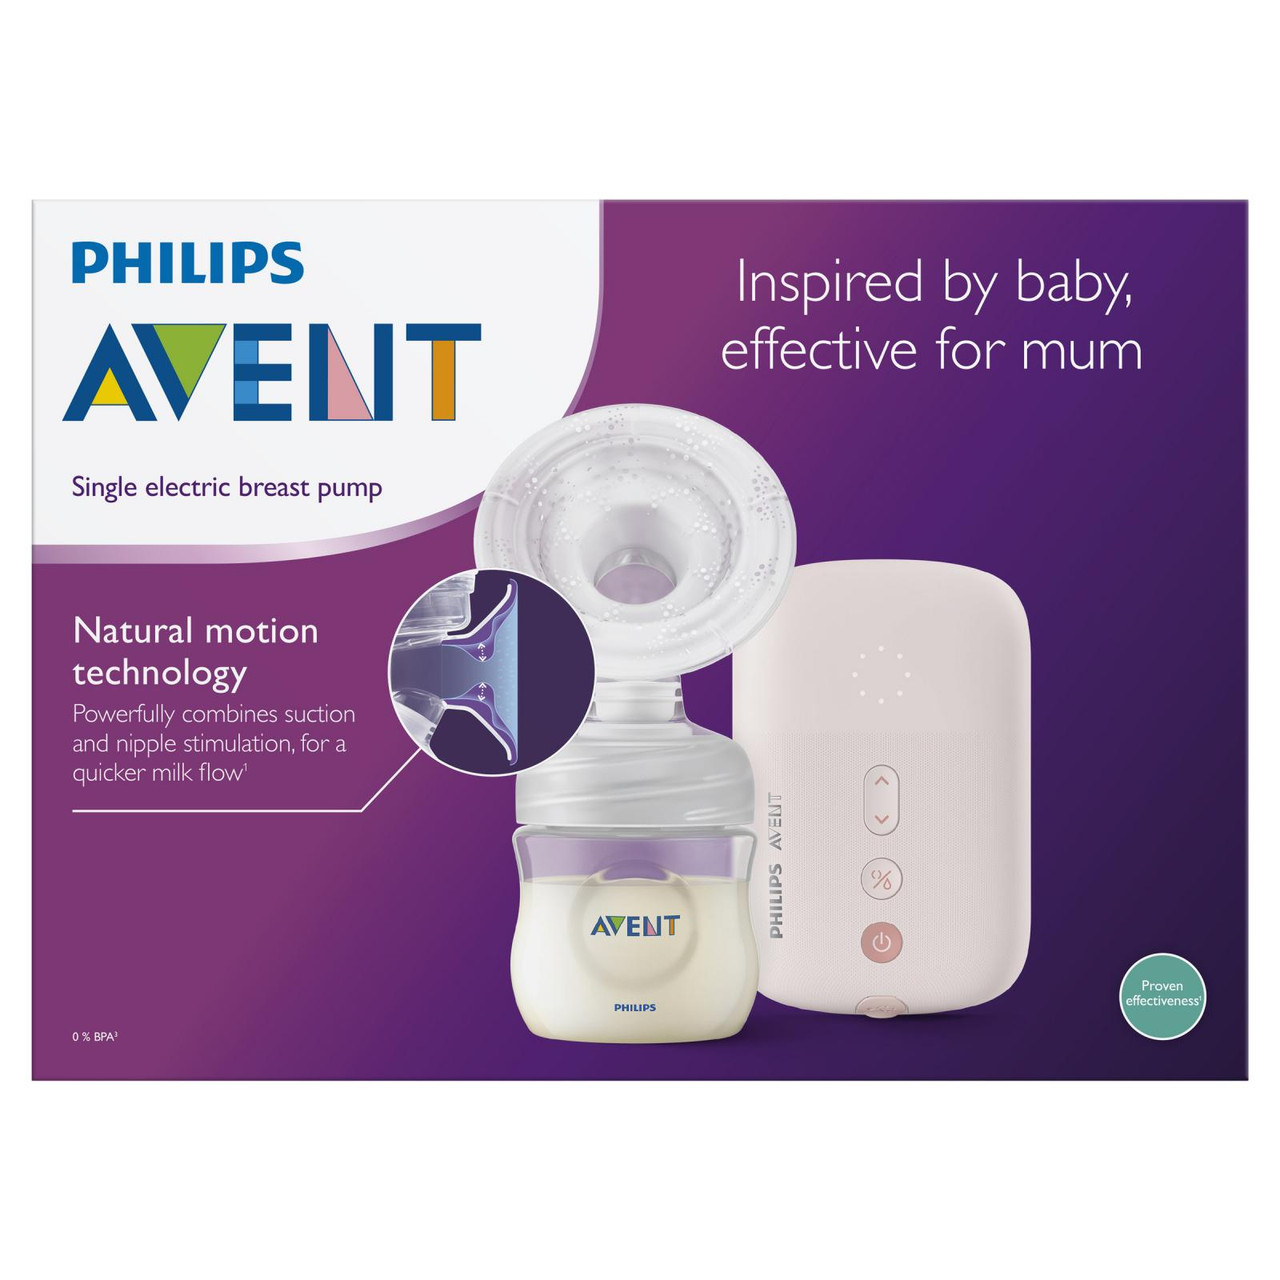 5 New Mums Review the Welcare Nurture Wearable Breast Pump 